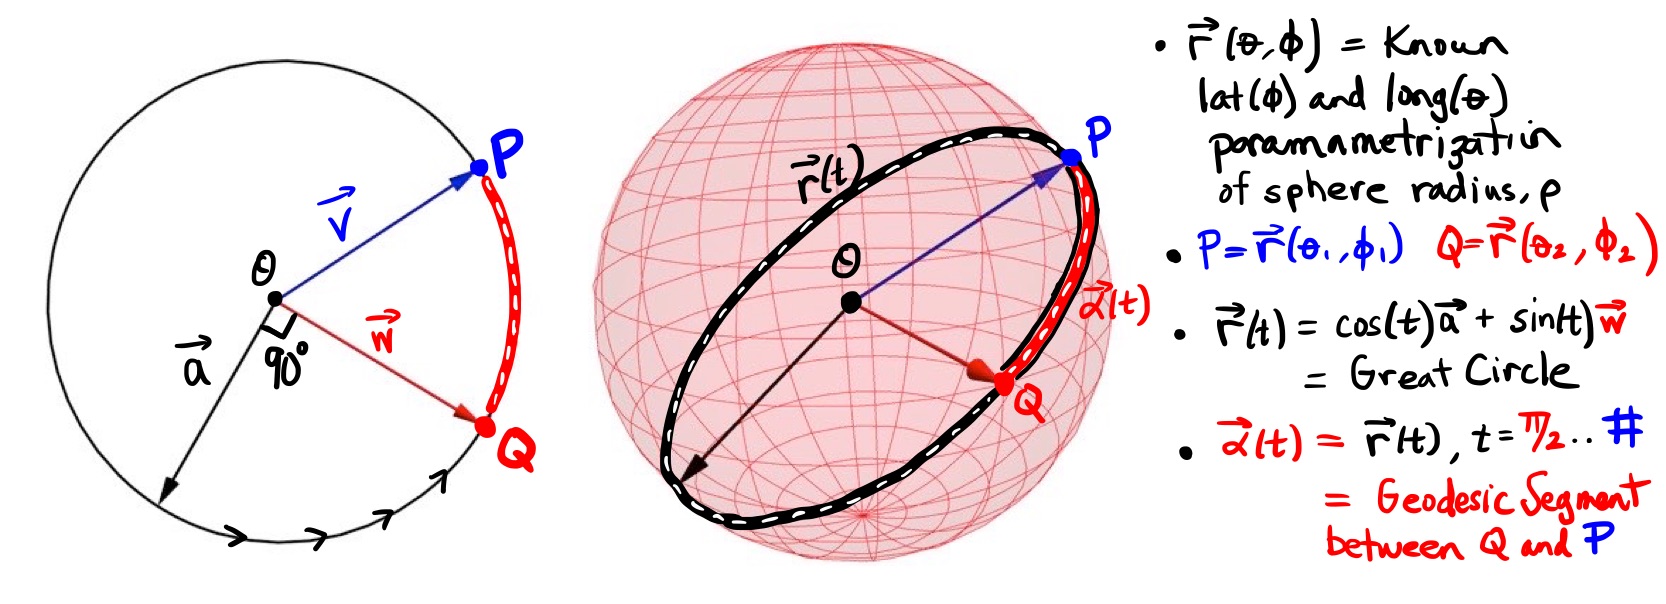 An Outline of a Method to Find the Equation of a Great Circle. The geodesic between two points \(P\) and \(Q\) on a sphere is the arc of a great circle connecting these two points (shown here is the shortest geodesic between the points).